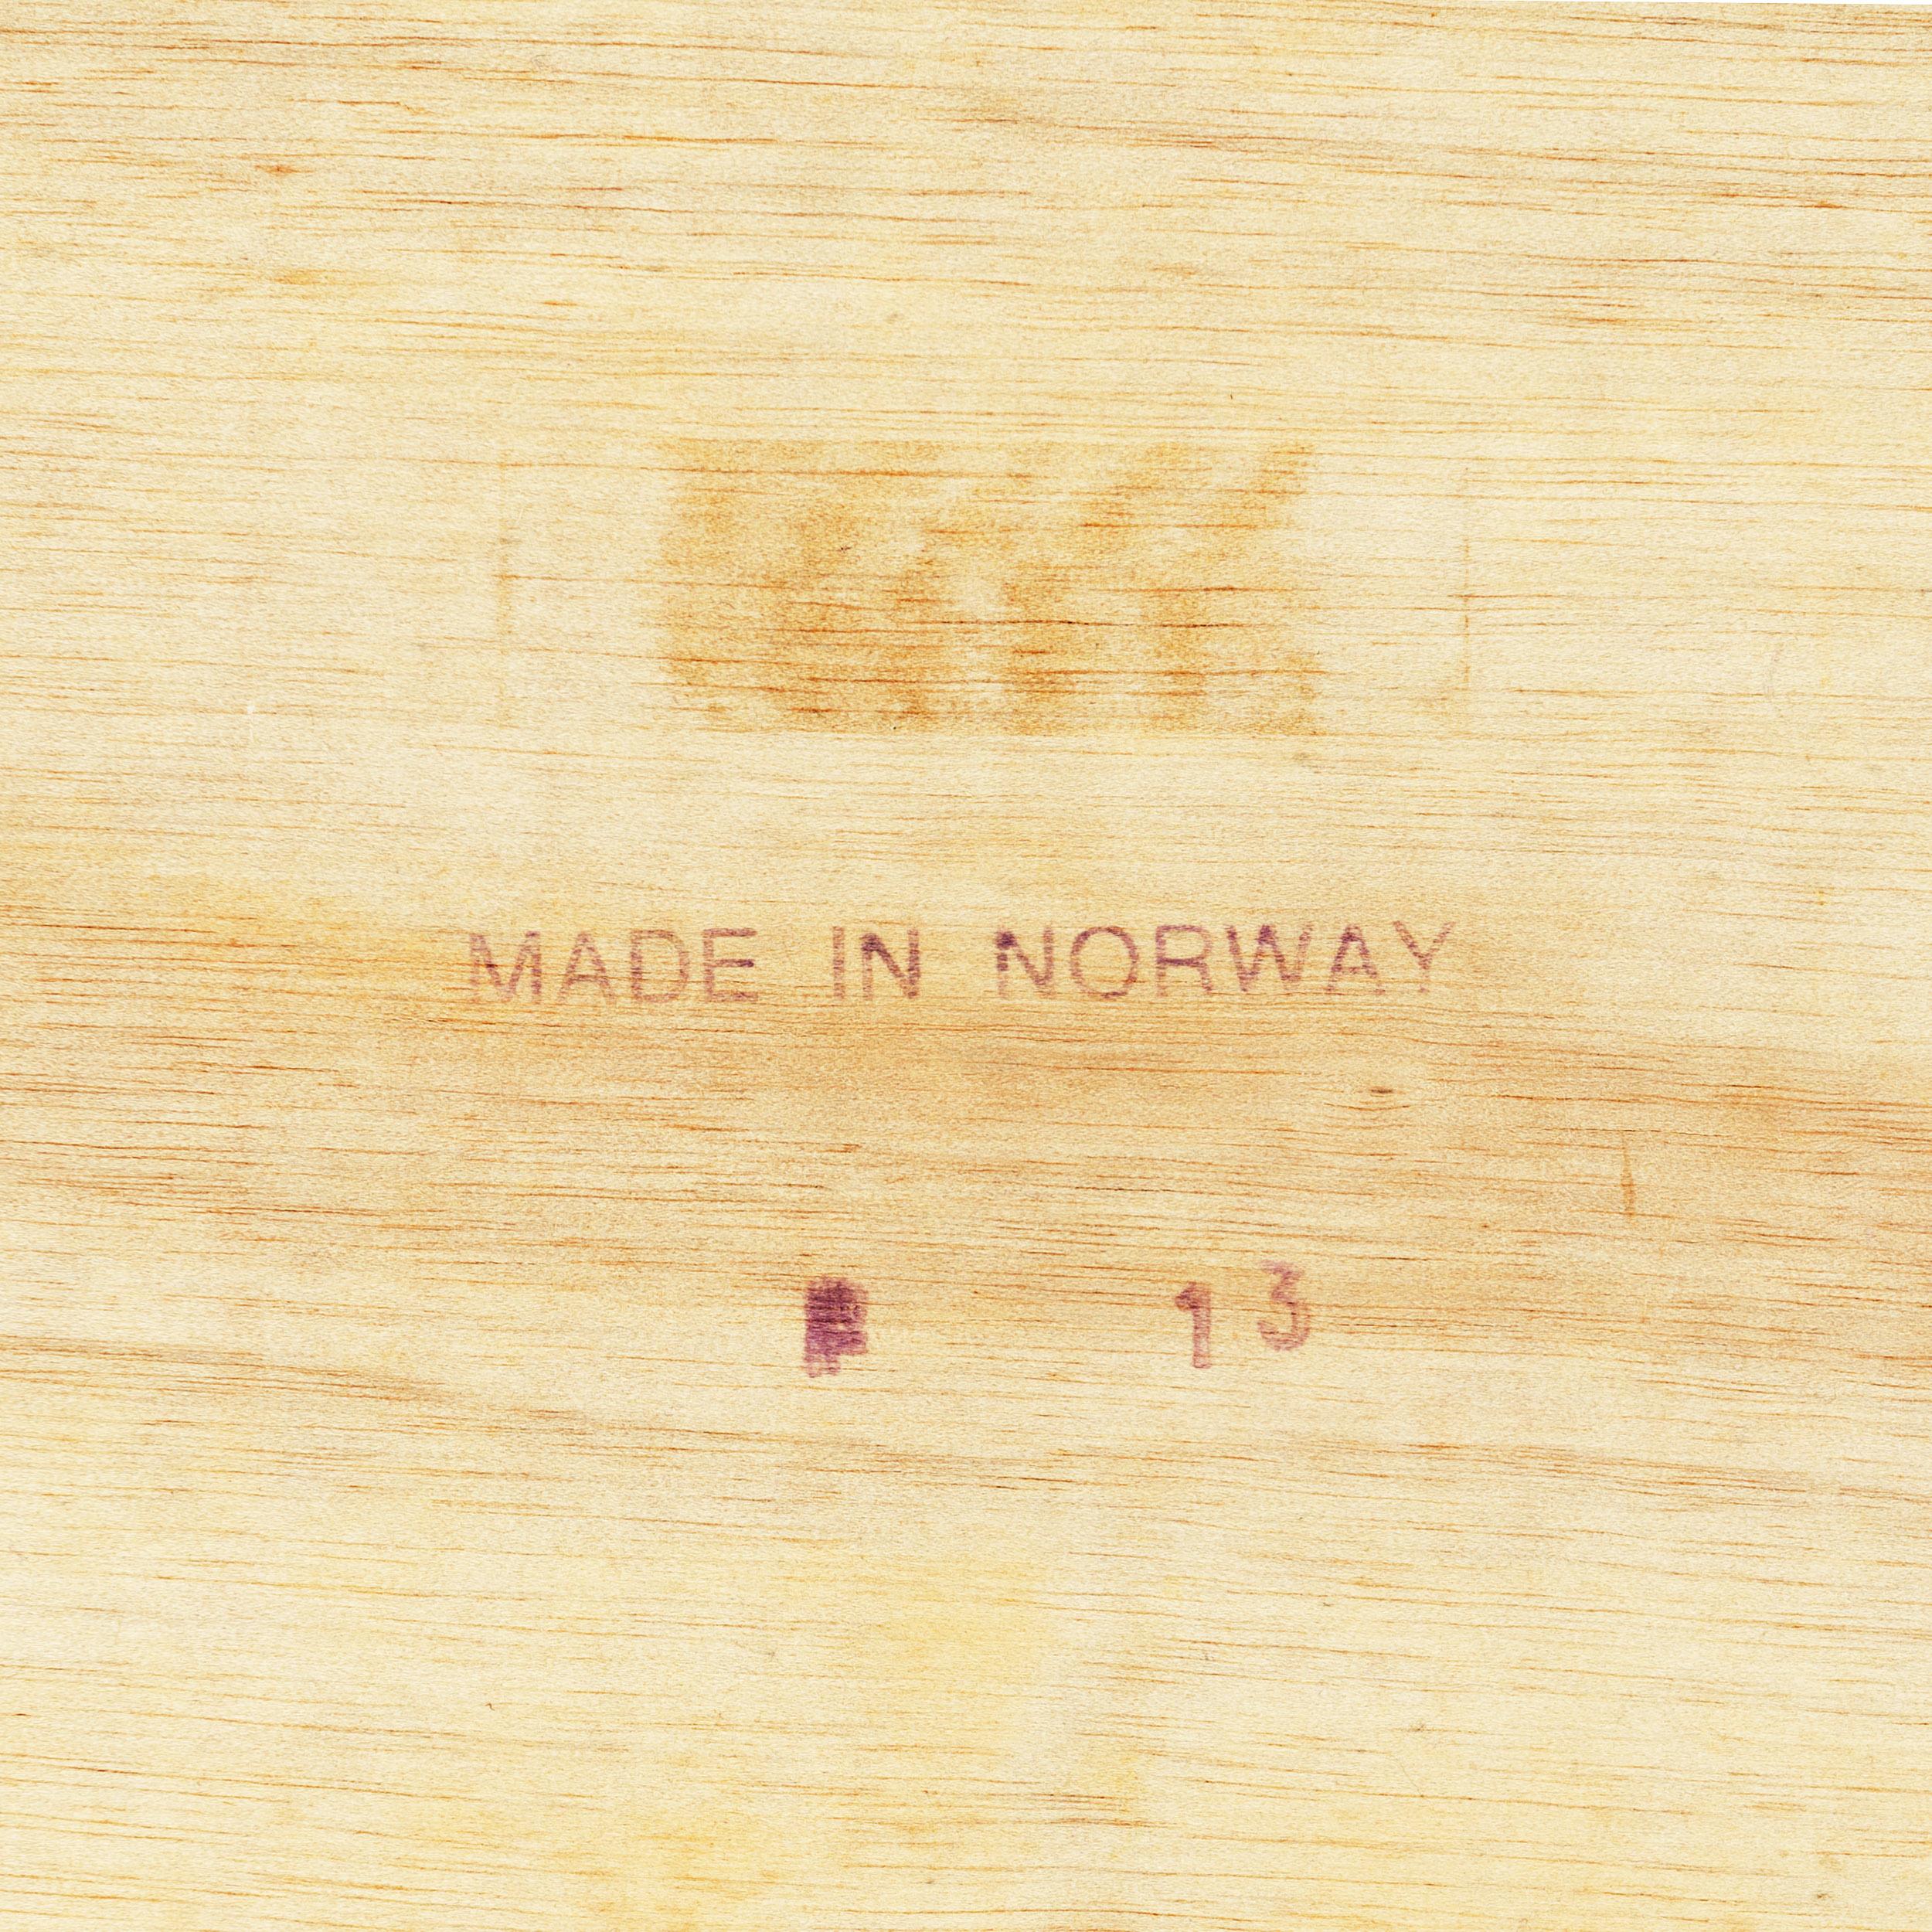 Mid-20th Century 1960s Norwegian Rosewood Magazine Caddy For Sale